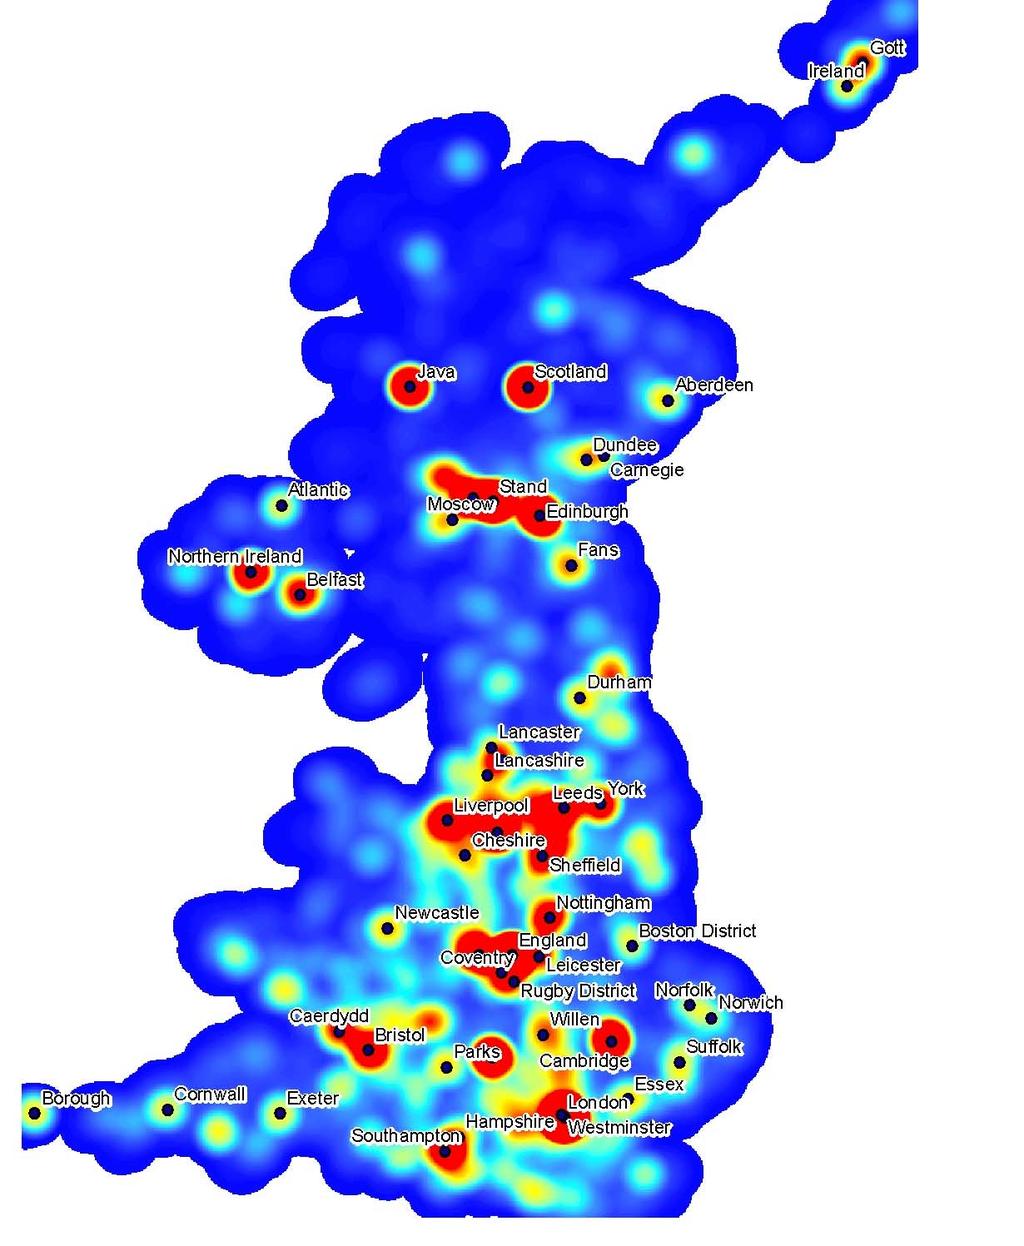 comparison, 942 locations can be found in the UK SABE data of which approximately 11% are ambiguous.